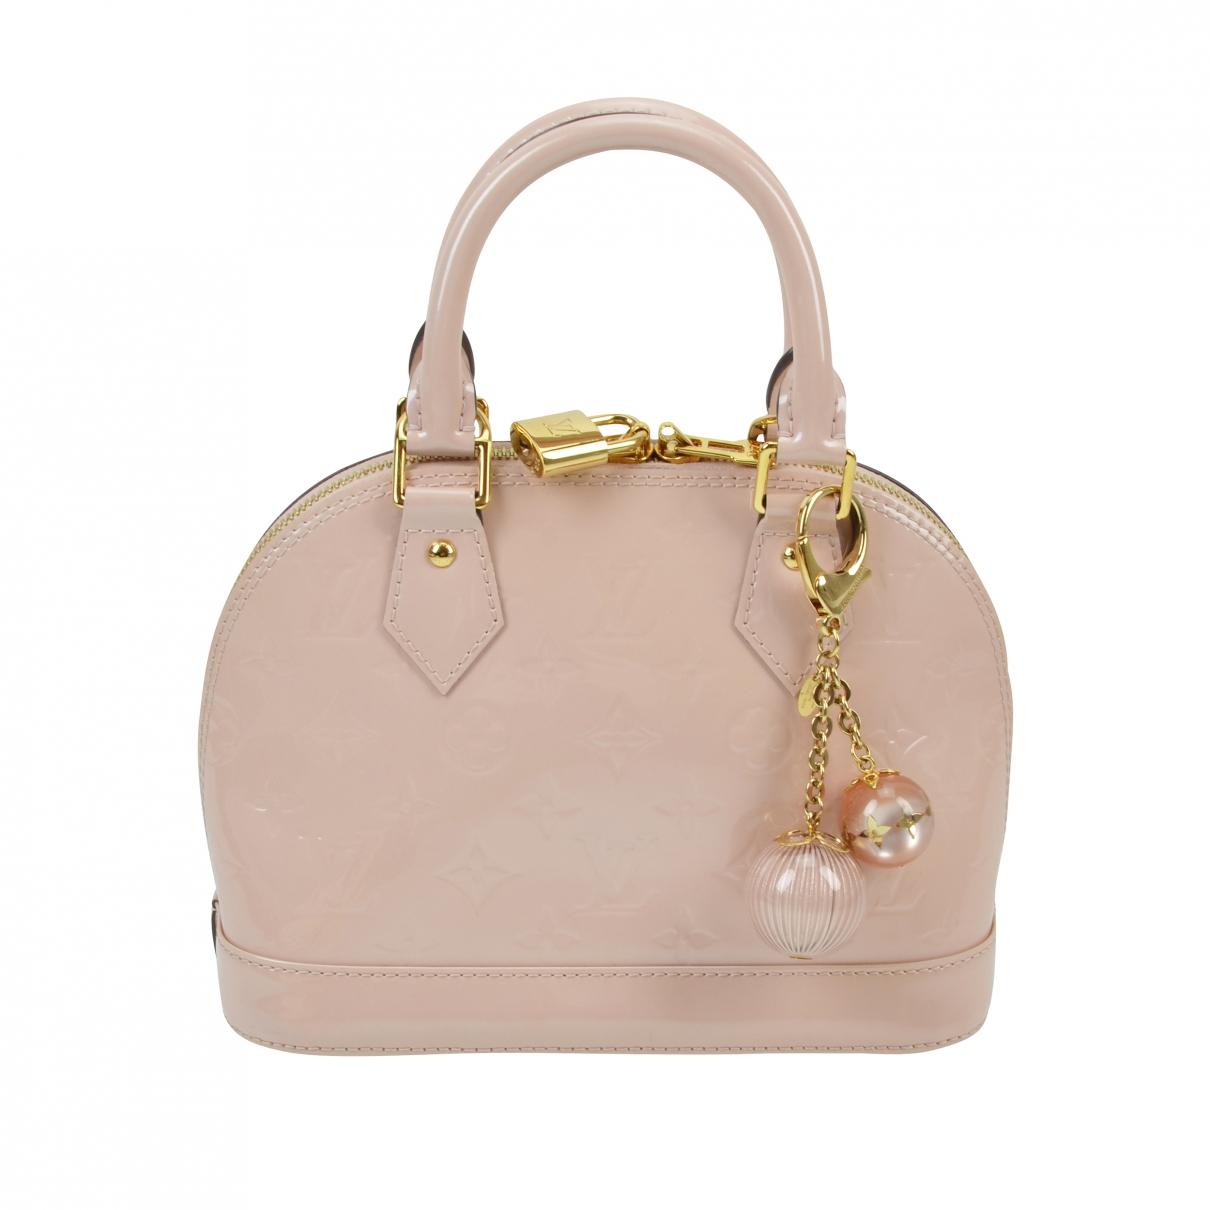 Lyst - Louis Vuitton Alma Bb Patent Leather Handbag in Pink